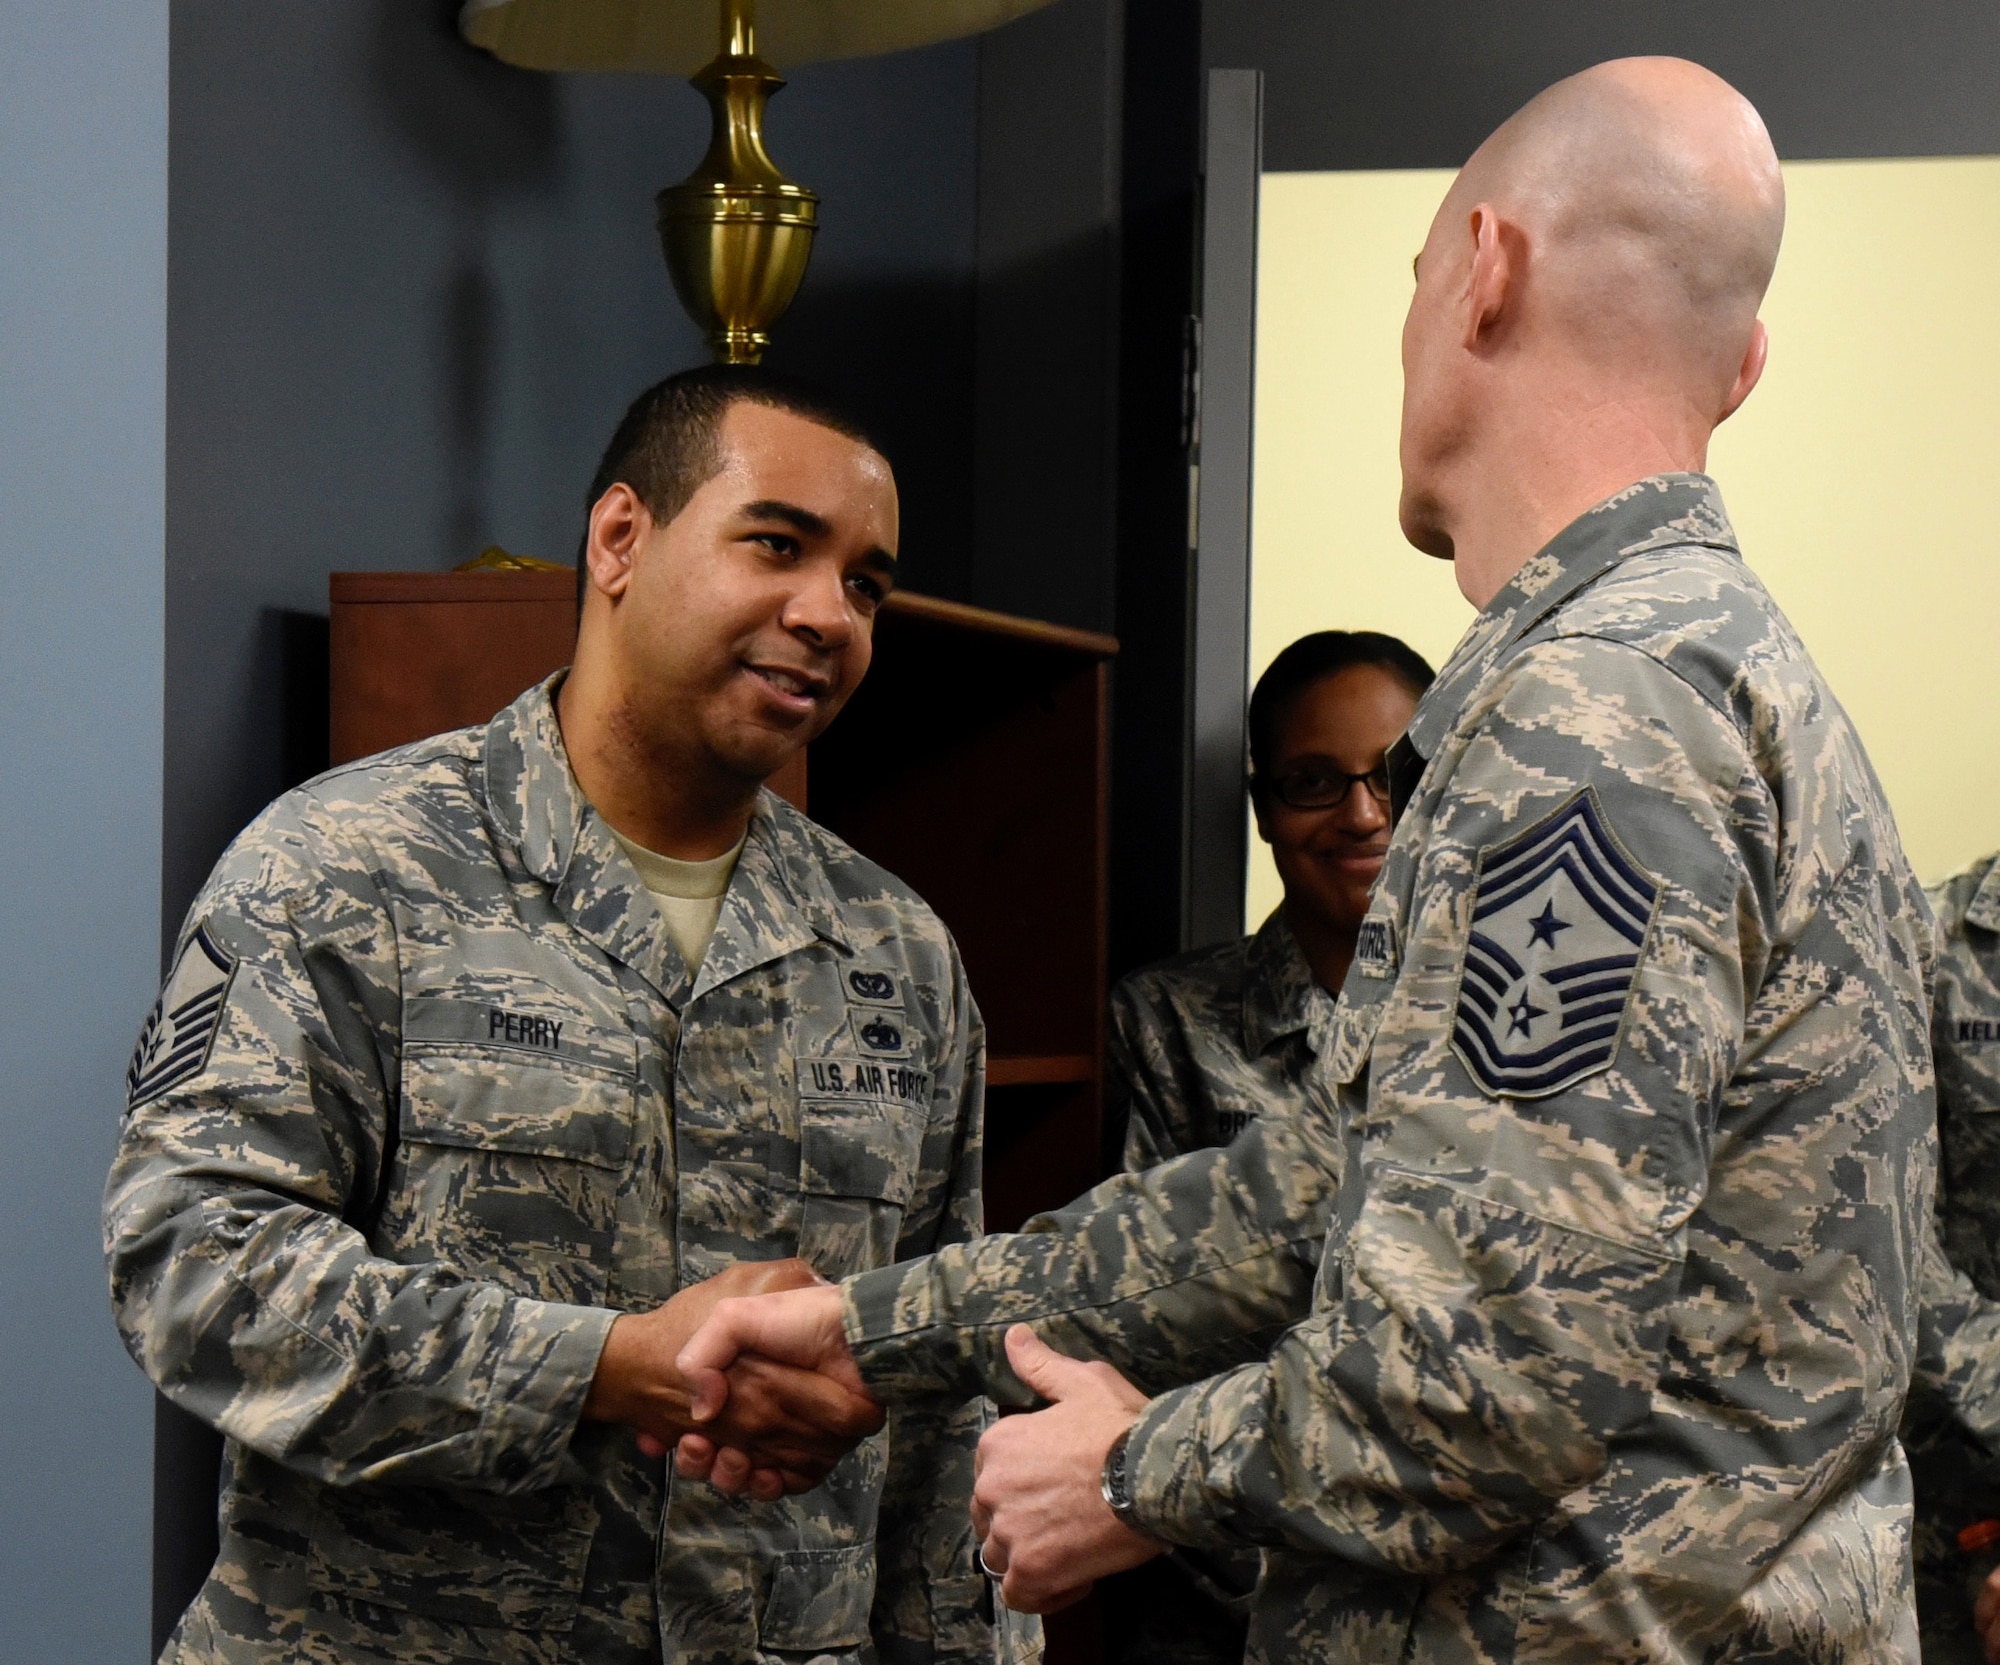 Command Chief Master Sgt. Ronald C. Anderson Jr., Command Chief Master Sergeant of the Air National Guard, coins Master Sgt. Dallas Perry, 235th Civil Engineering Flight program analyst, February 10, 2018 while touring Warfield Air National Guard Base, Middle River, Md.